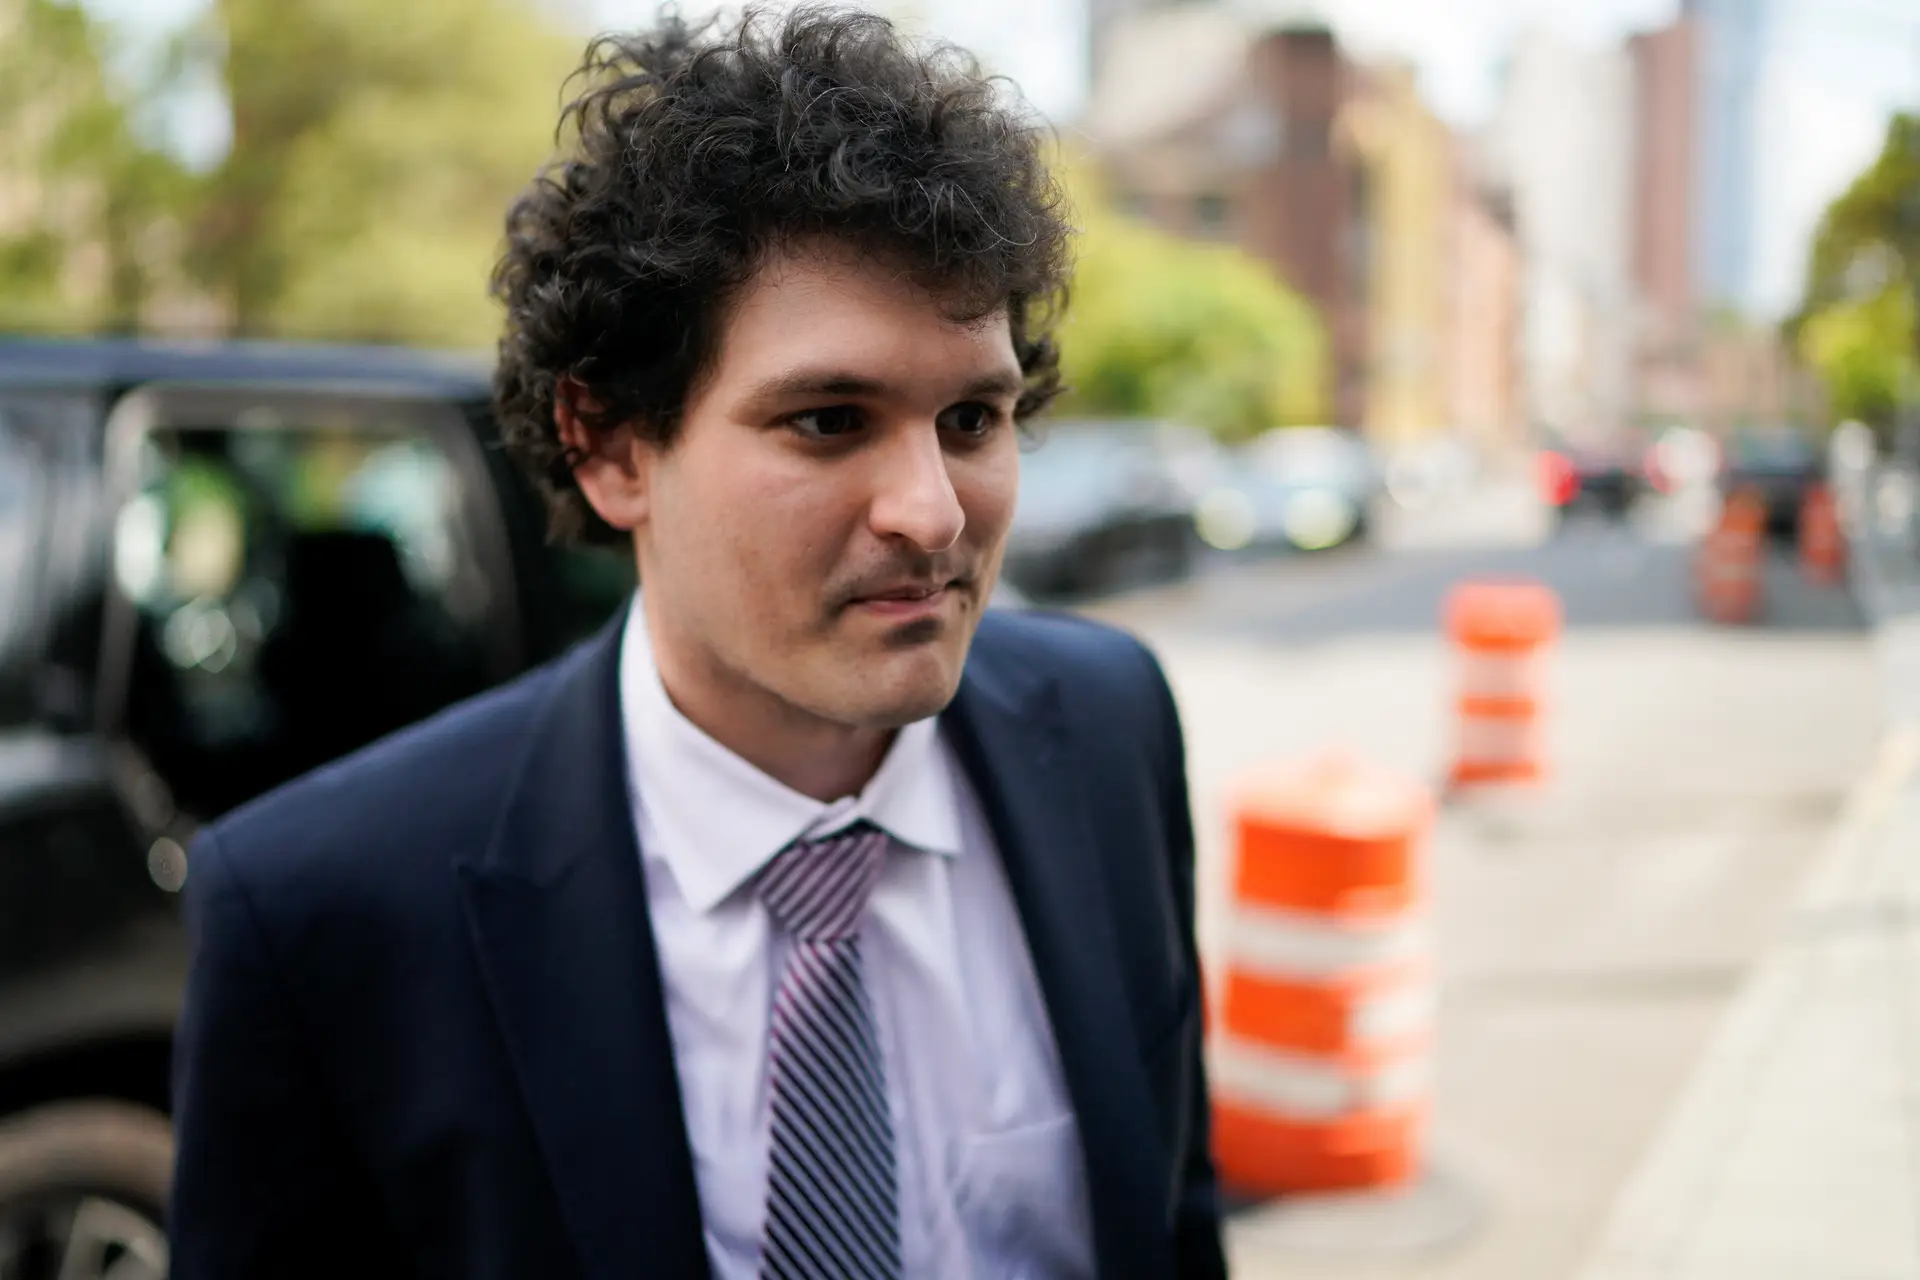 Sam Bankman-Fried, founder of cryptocurrency platform FTX, has been sentenced to 25 years in prison